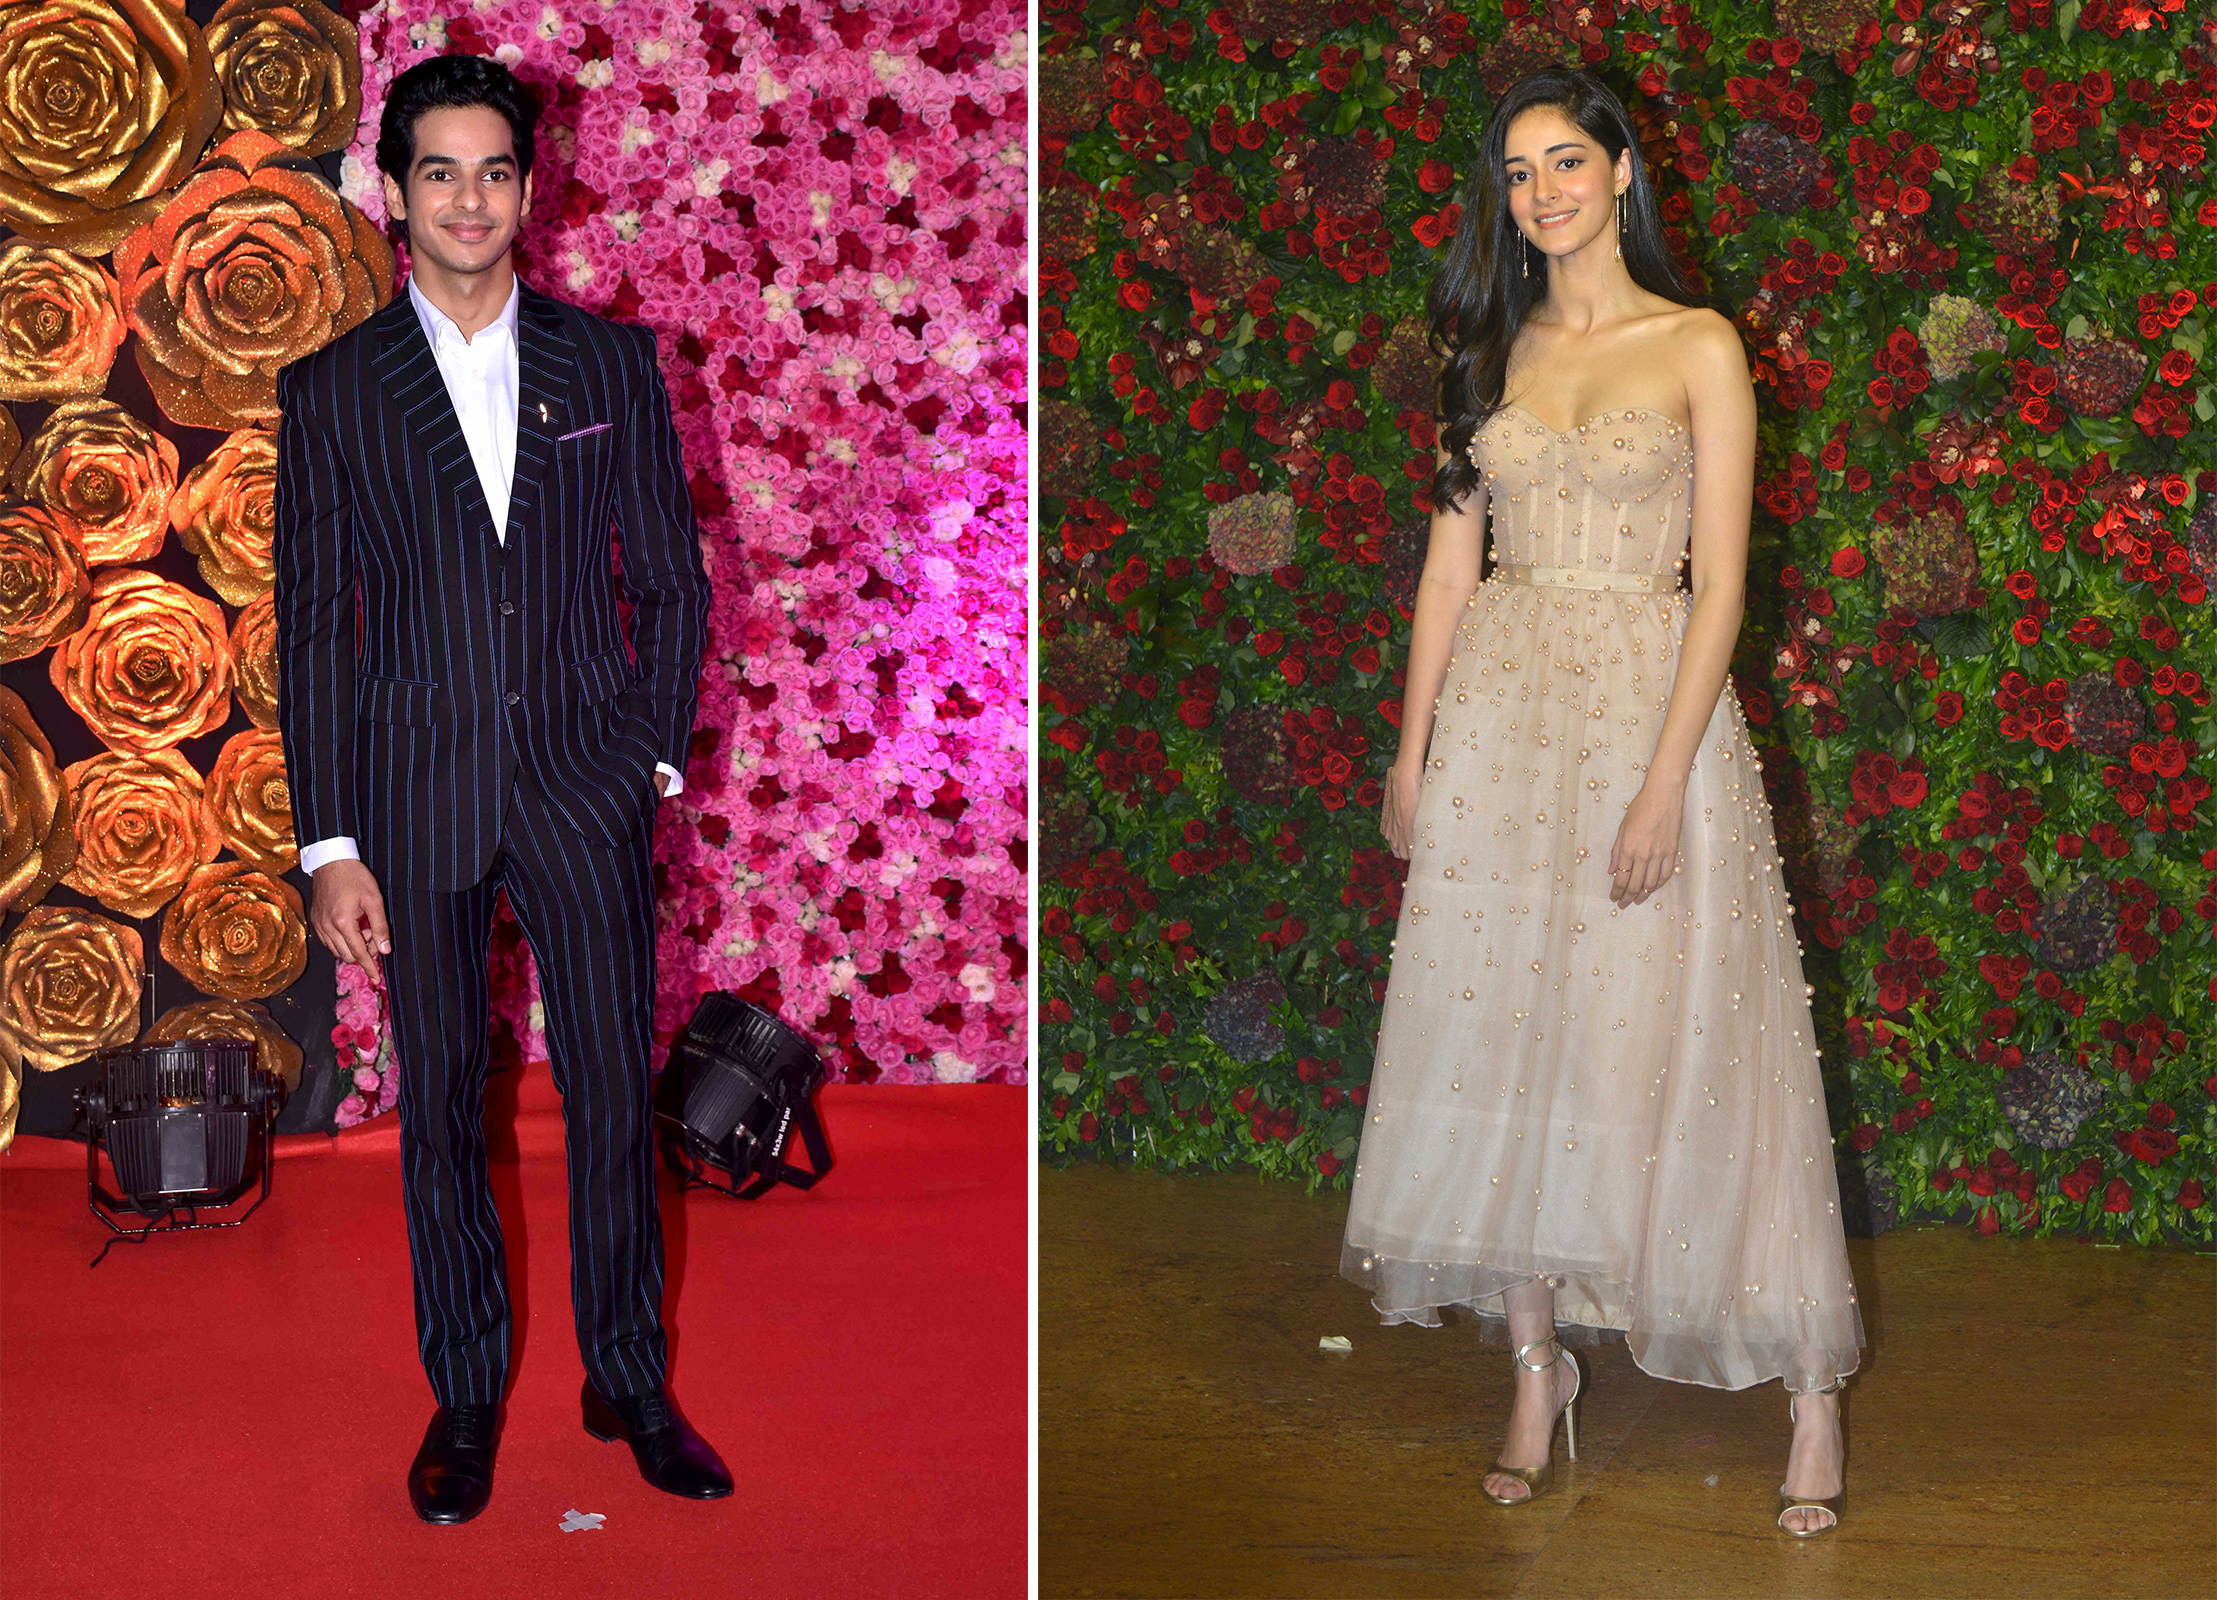 Left: Actor Ishaan Khatter seen on the red carpet during the LUX Awards on Nov. 18, 2018 in Mumbai; Right: Actor Ananya Panday at Ranveer Singh and Deepika Padukone's reception on Dec. 1, 2018 in Mumbai (Azhar Khan—SOPA Images/LightRocket/Getty Images; Milind Shelte—The India Today Group/Getty Images)